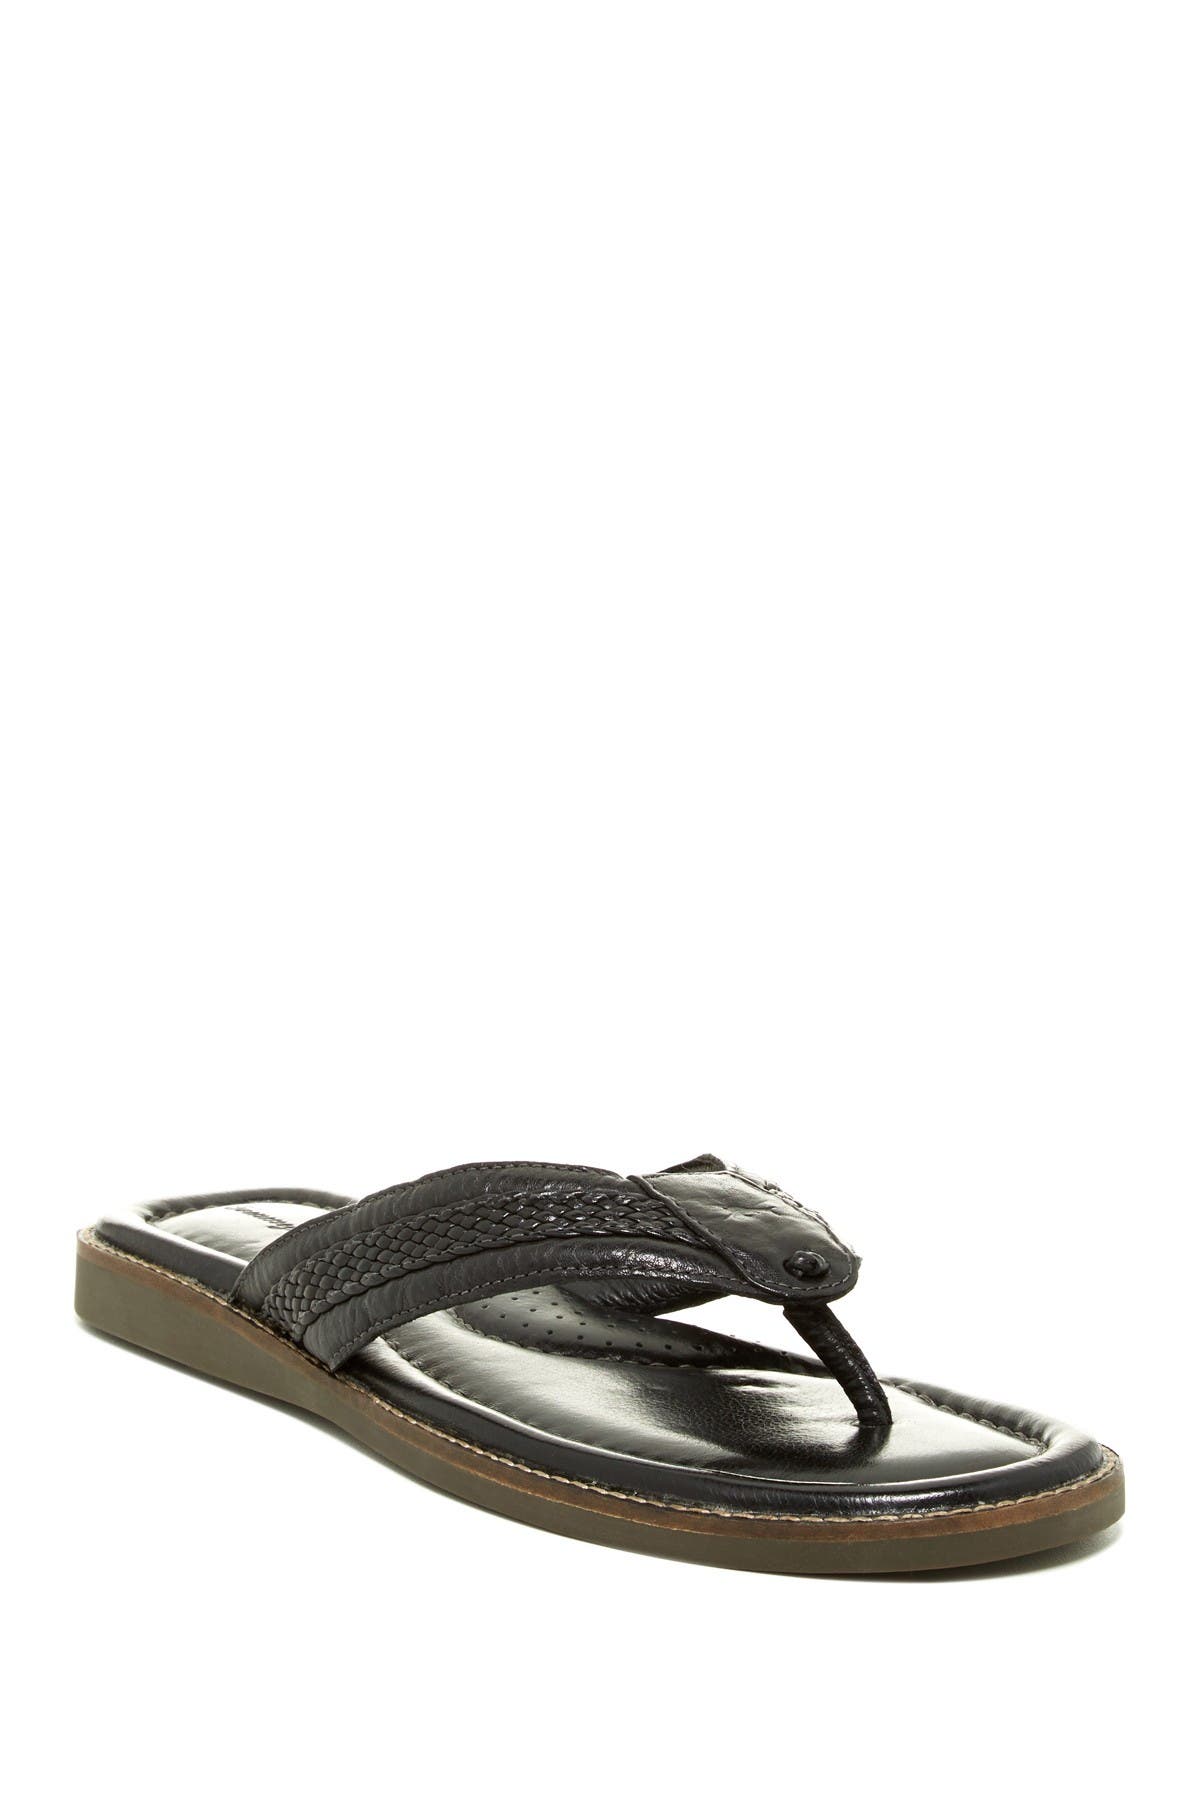 Tommy Bahama | Anchors Away Flip Flop 